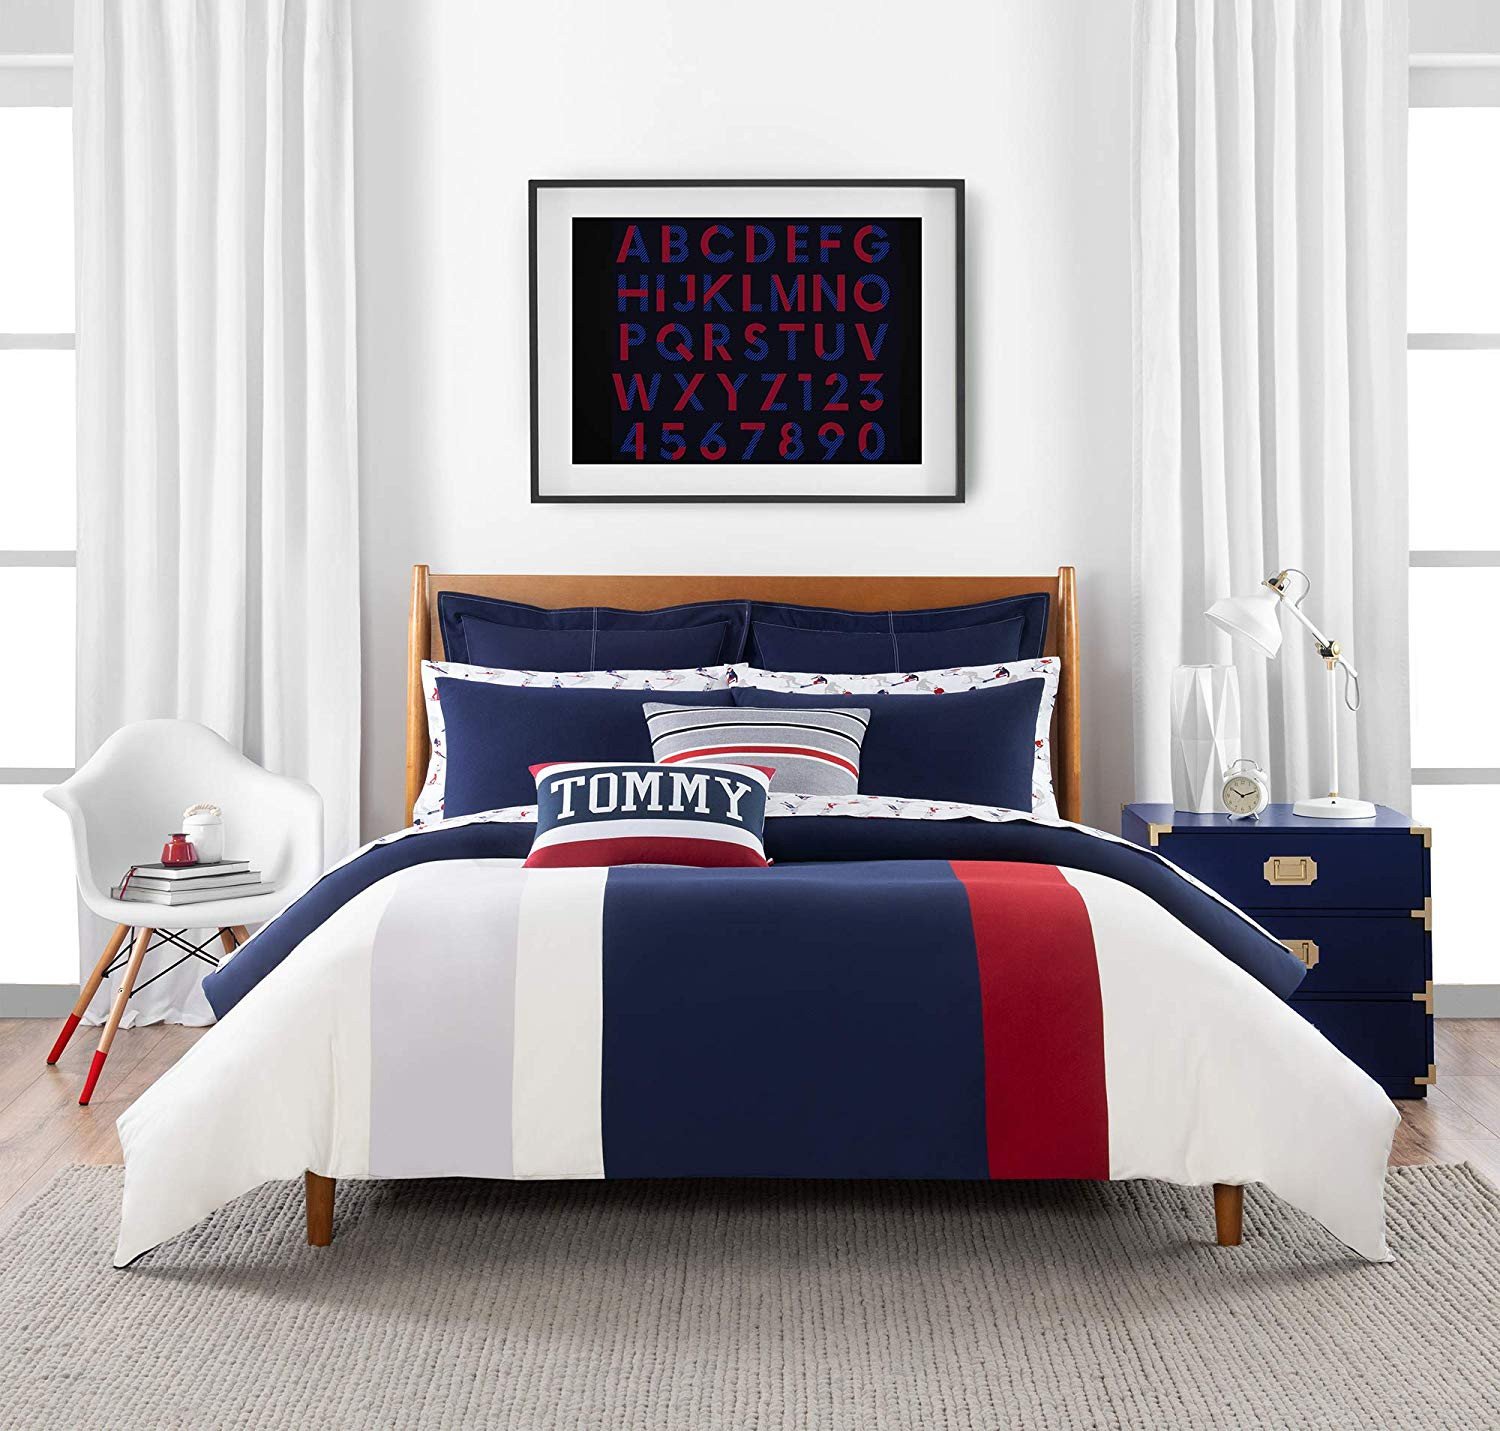 Twin Bedroom Set for Sale Fresh Amazon tommy Hilfiger Clash Of 85 Stripe Bedding